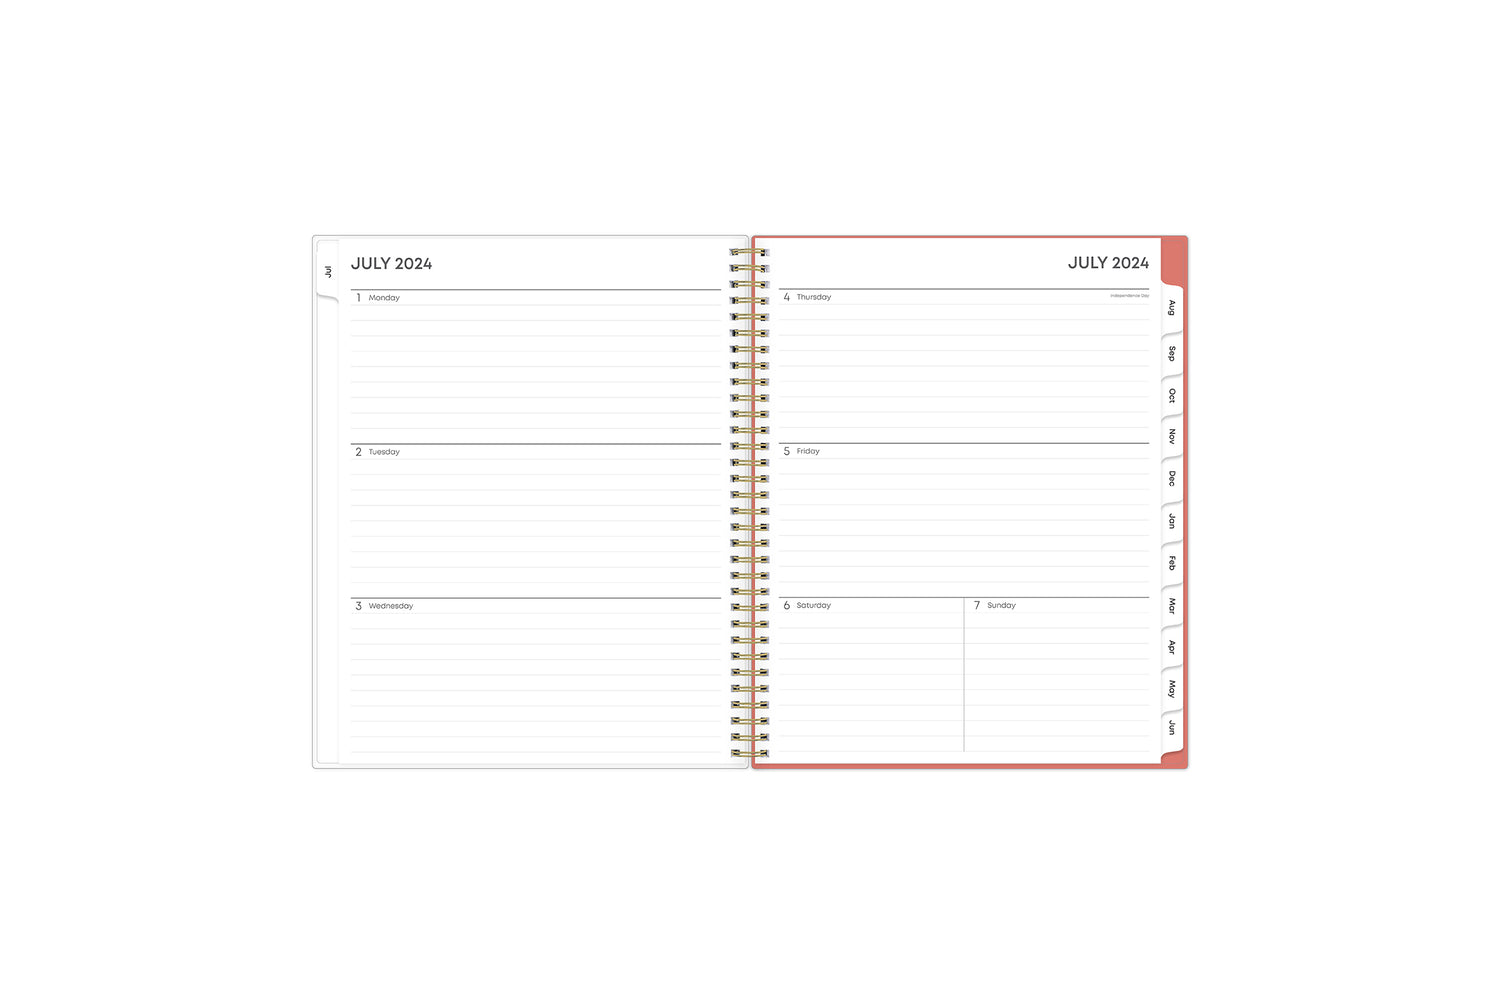 weekly monthly planner features a weekly spread with ample lined writing space for notes, to-do lists, projects, goals, doodling in a 8.5x11 planner size